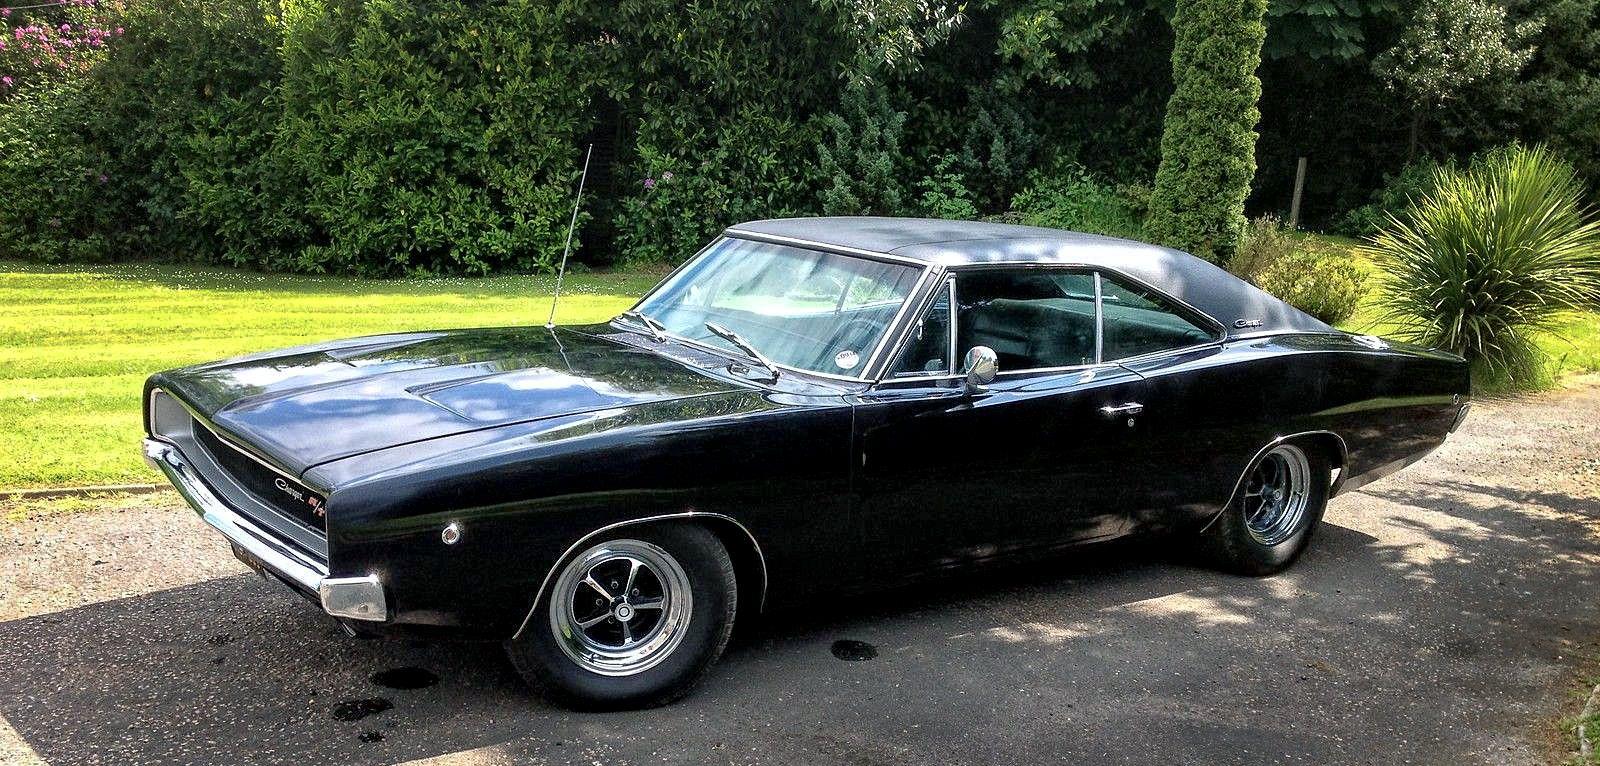 DODGE CHARGER 440 RT 1968 Muscle Car. Free Download Wallpaper